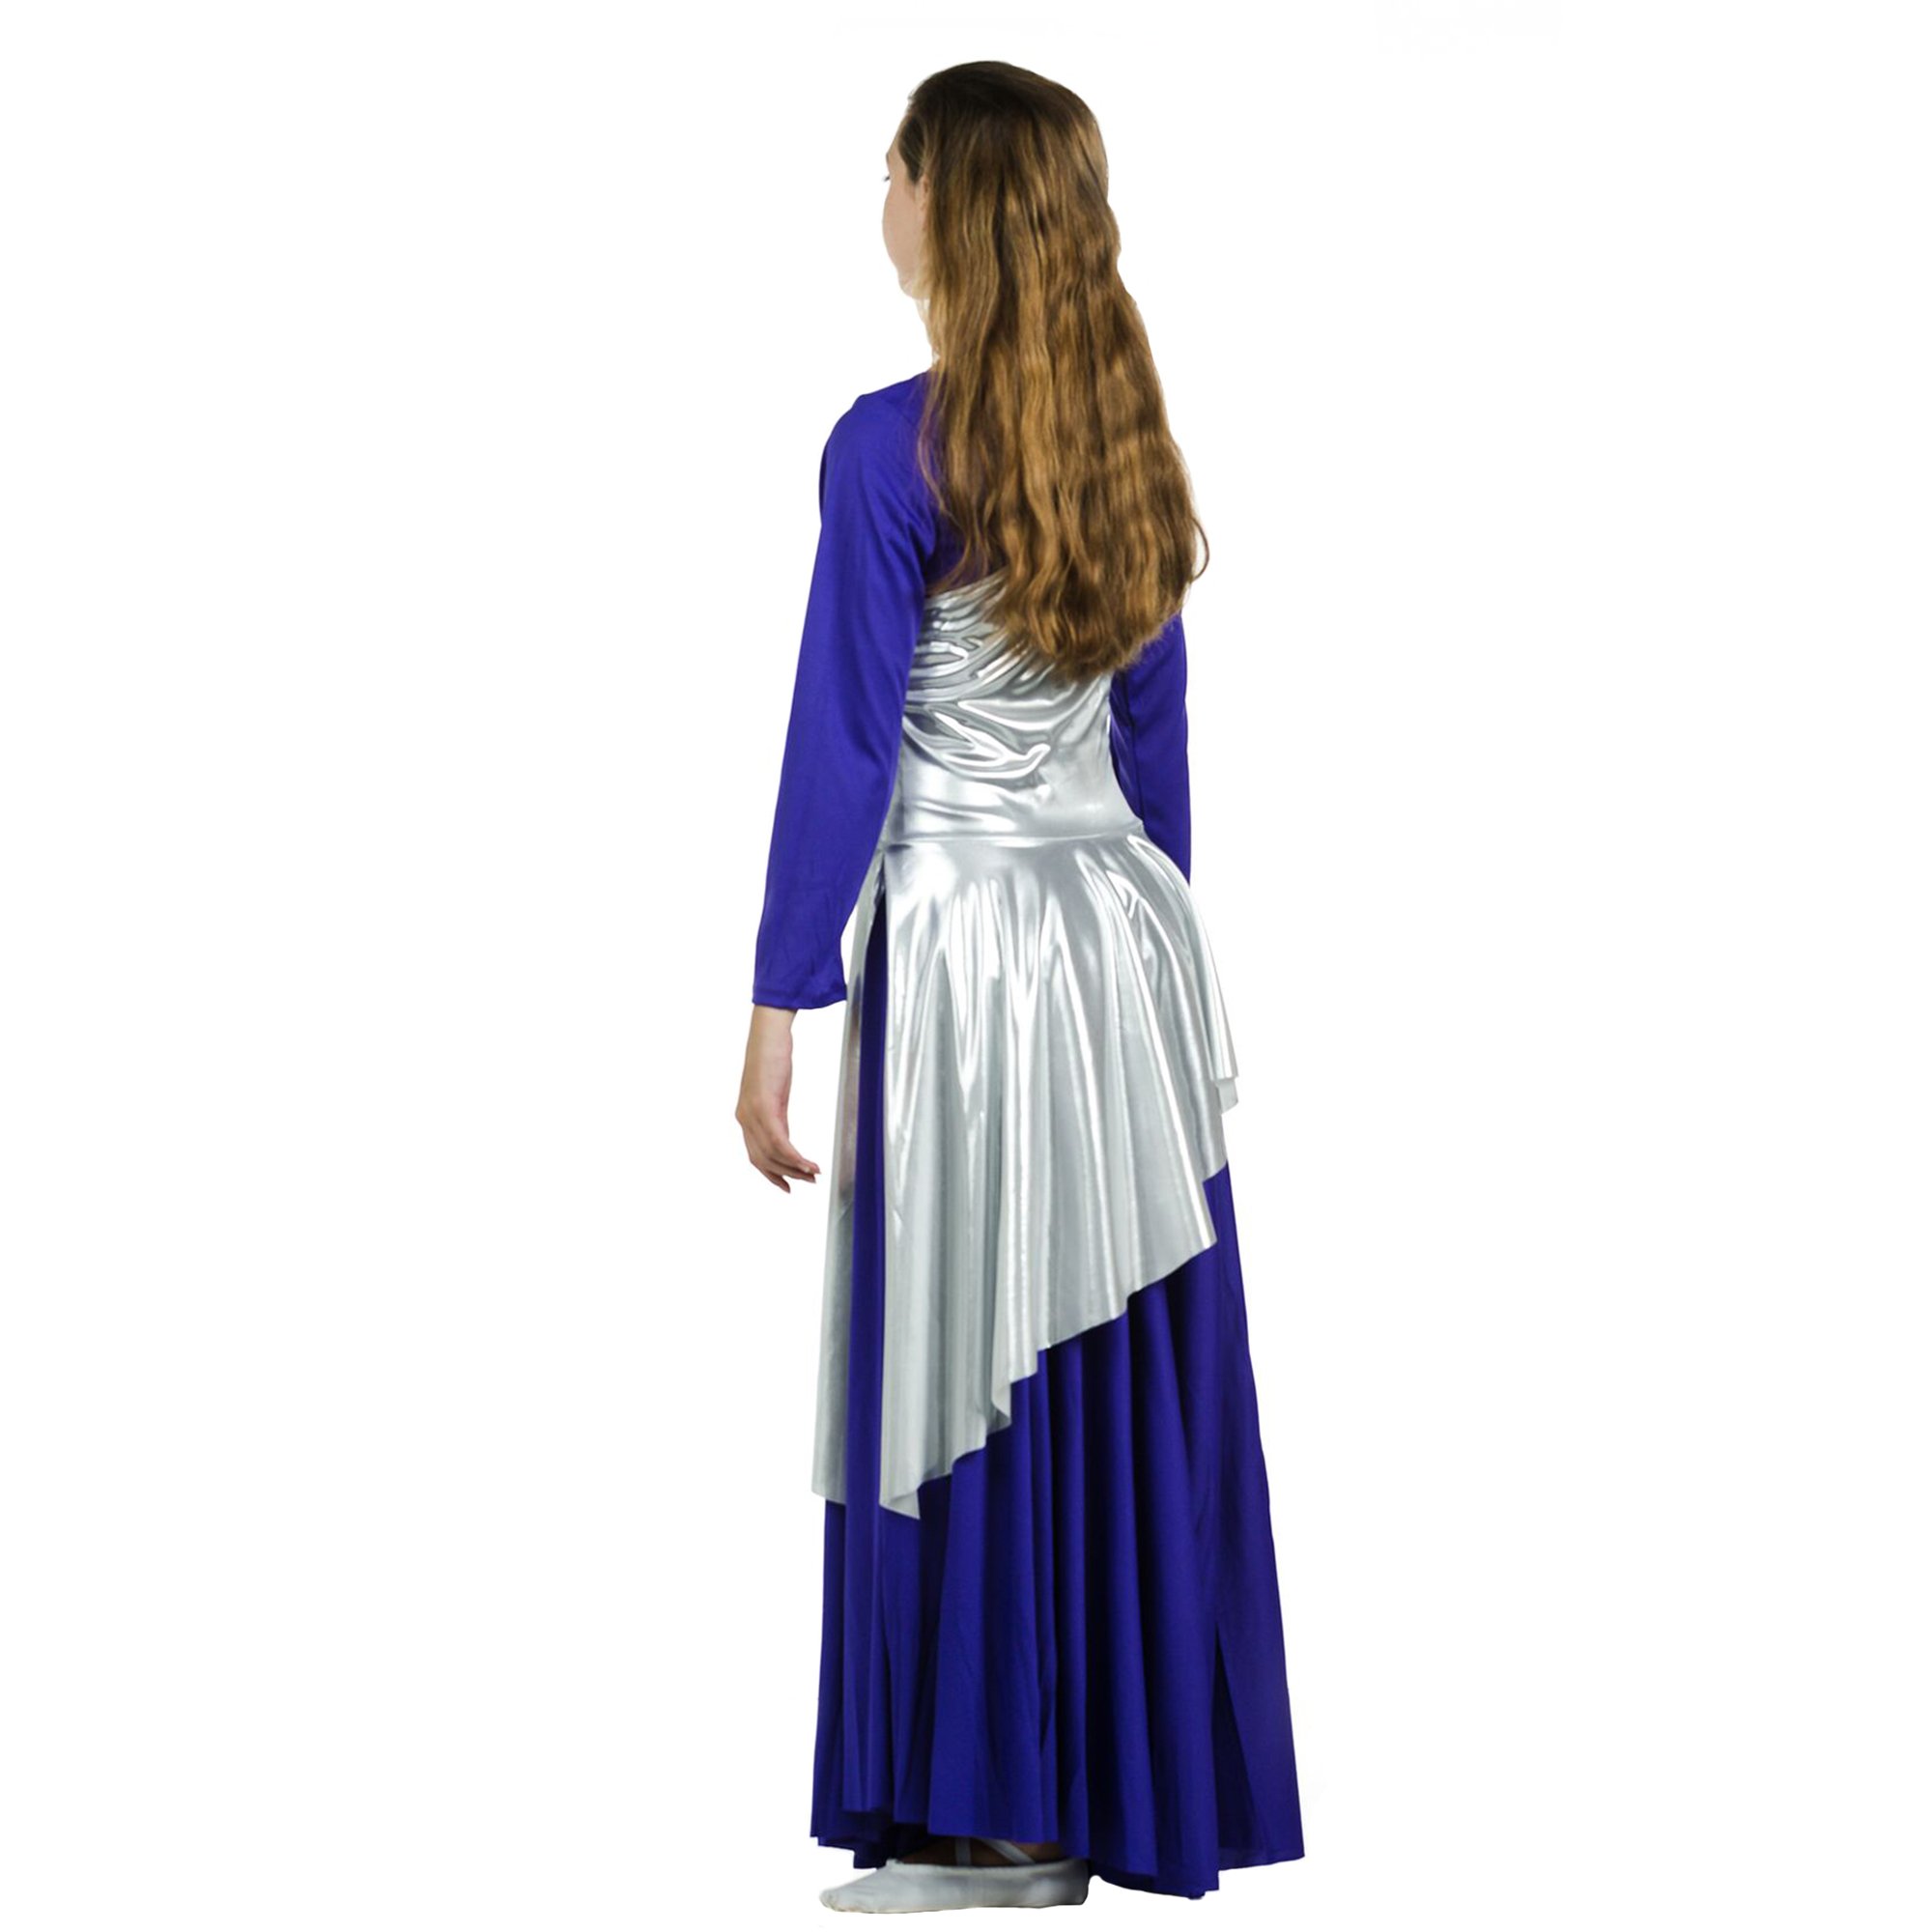 Danzcue Asymmetrical Praise Dance Tunic (dress not included) - Click Image to Close